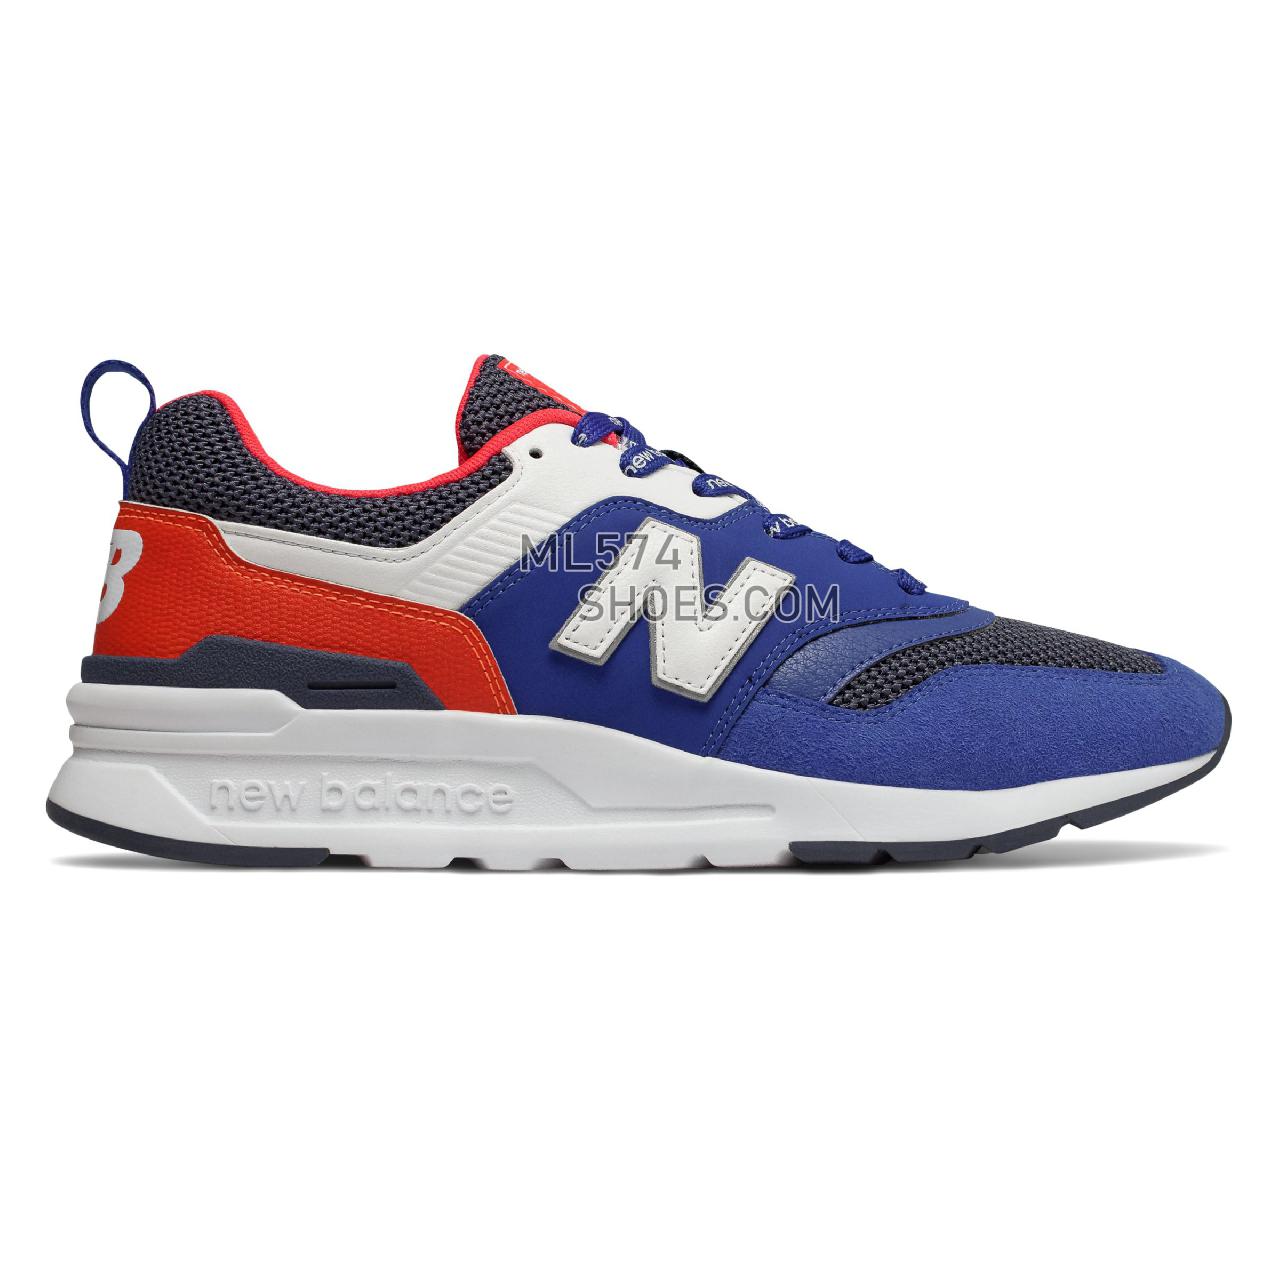 New Balance 997H - Men's Classic Sneakers - Team Royal with Energy Red - CM997HEB